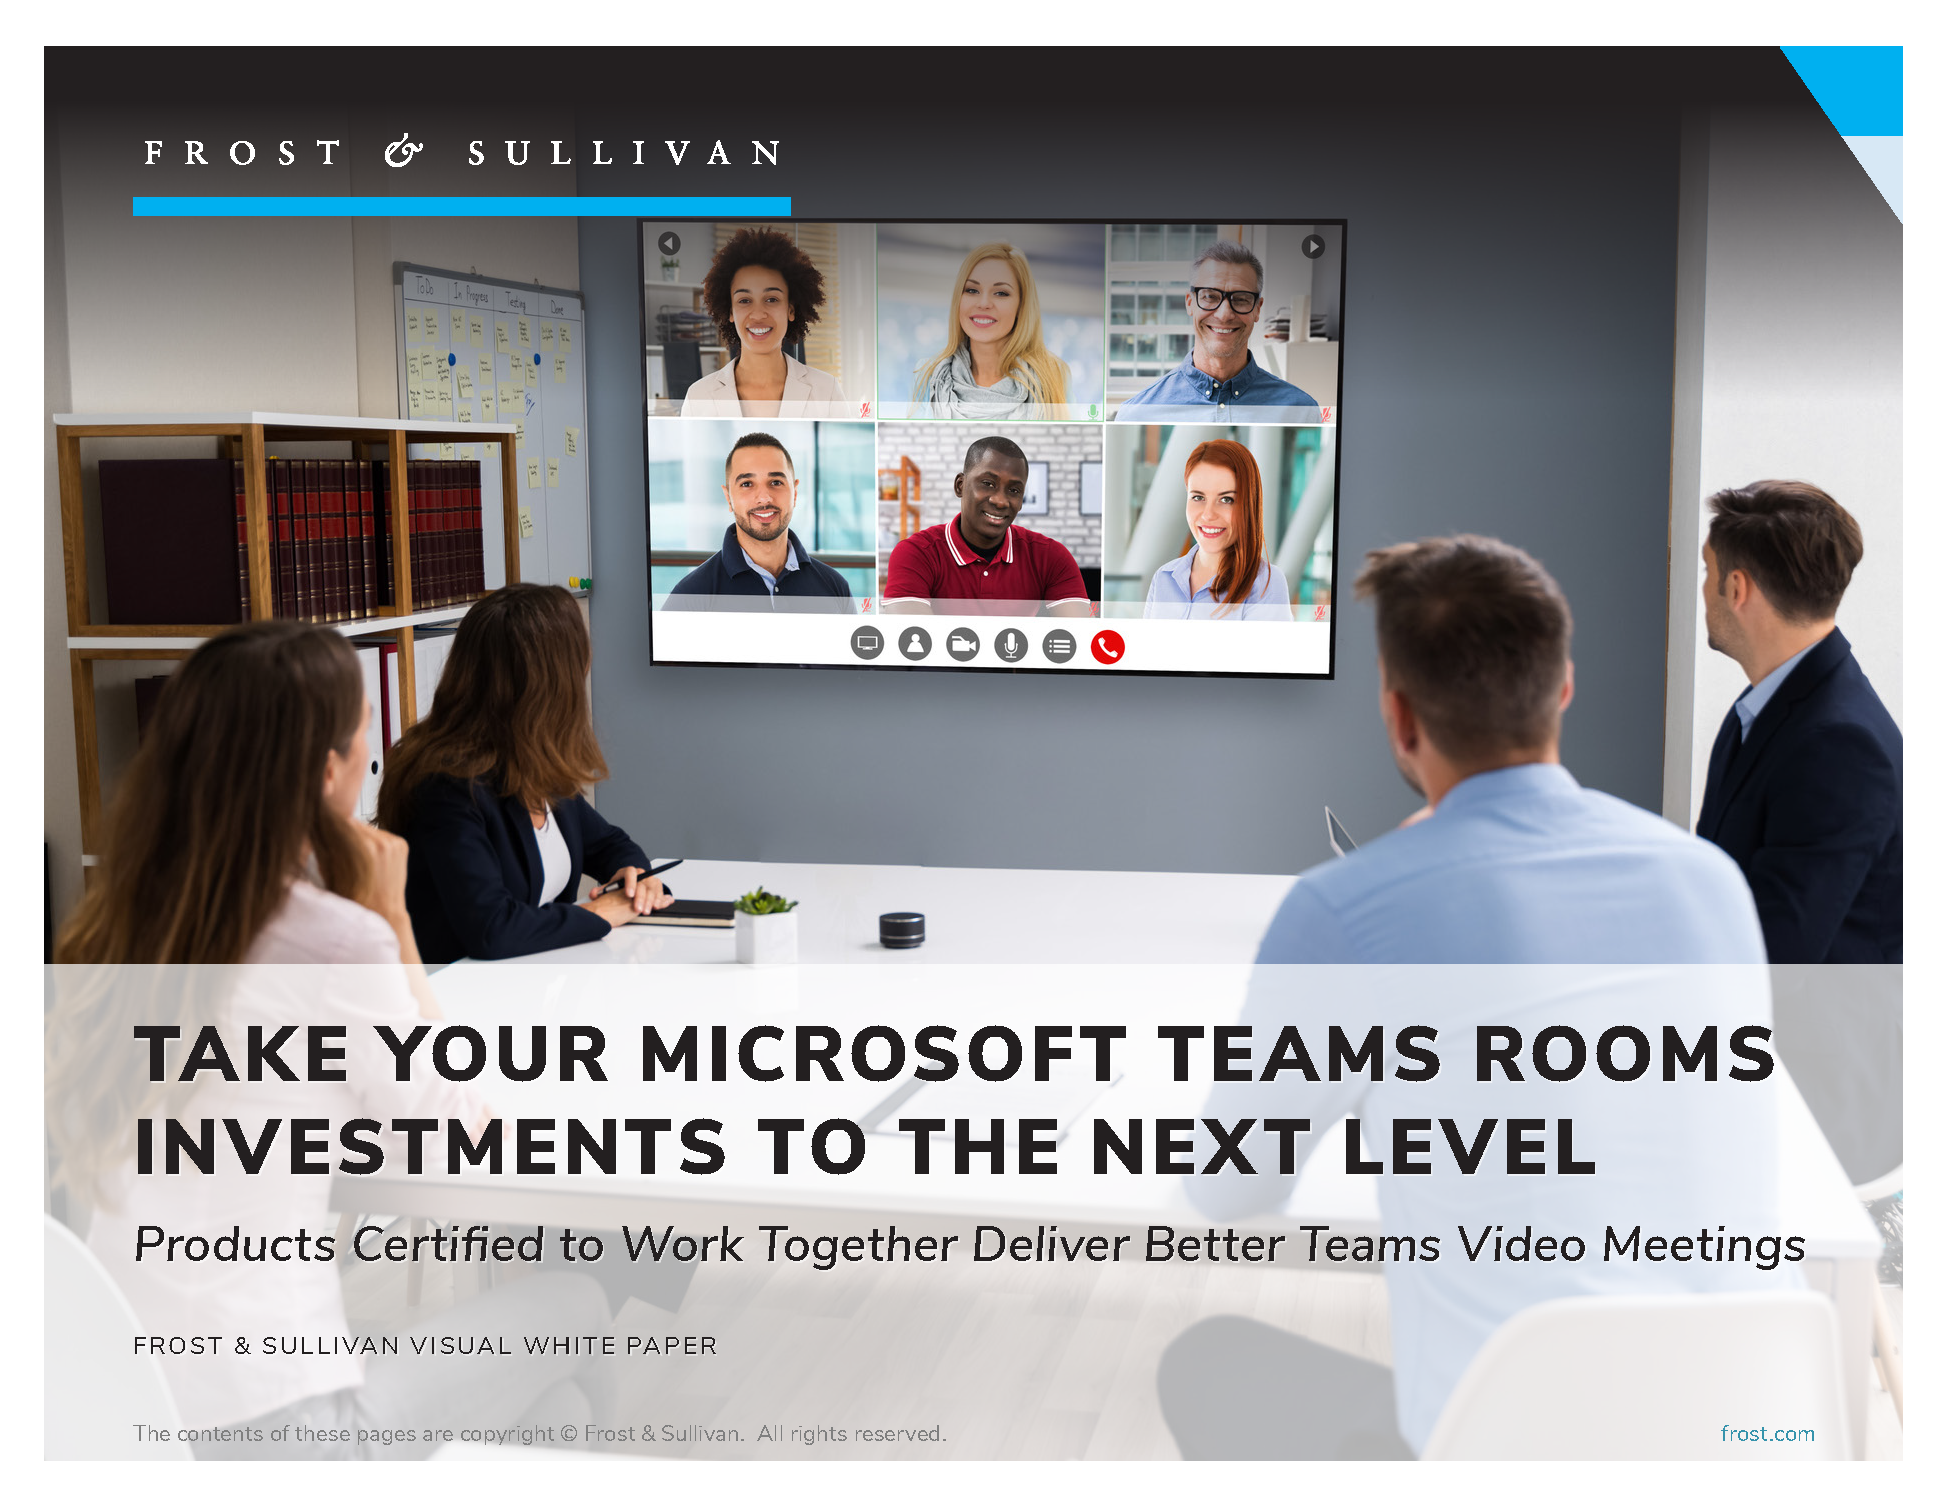 ake Your Microsoft Teams Rooms Investments to the Next Level